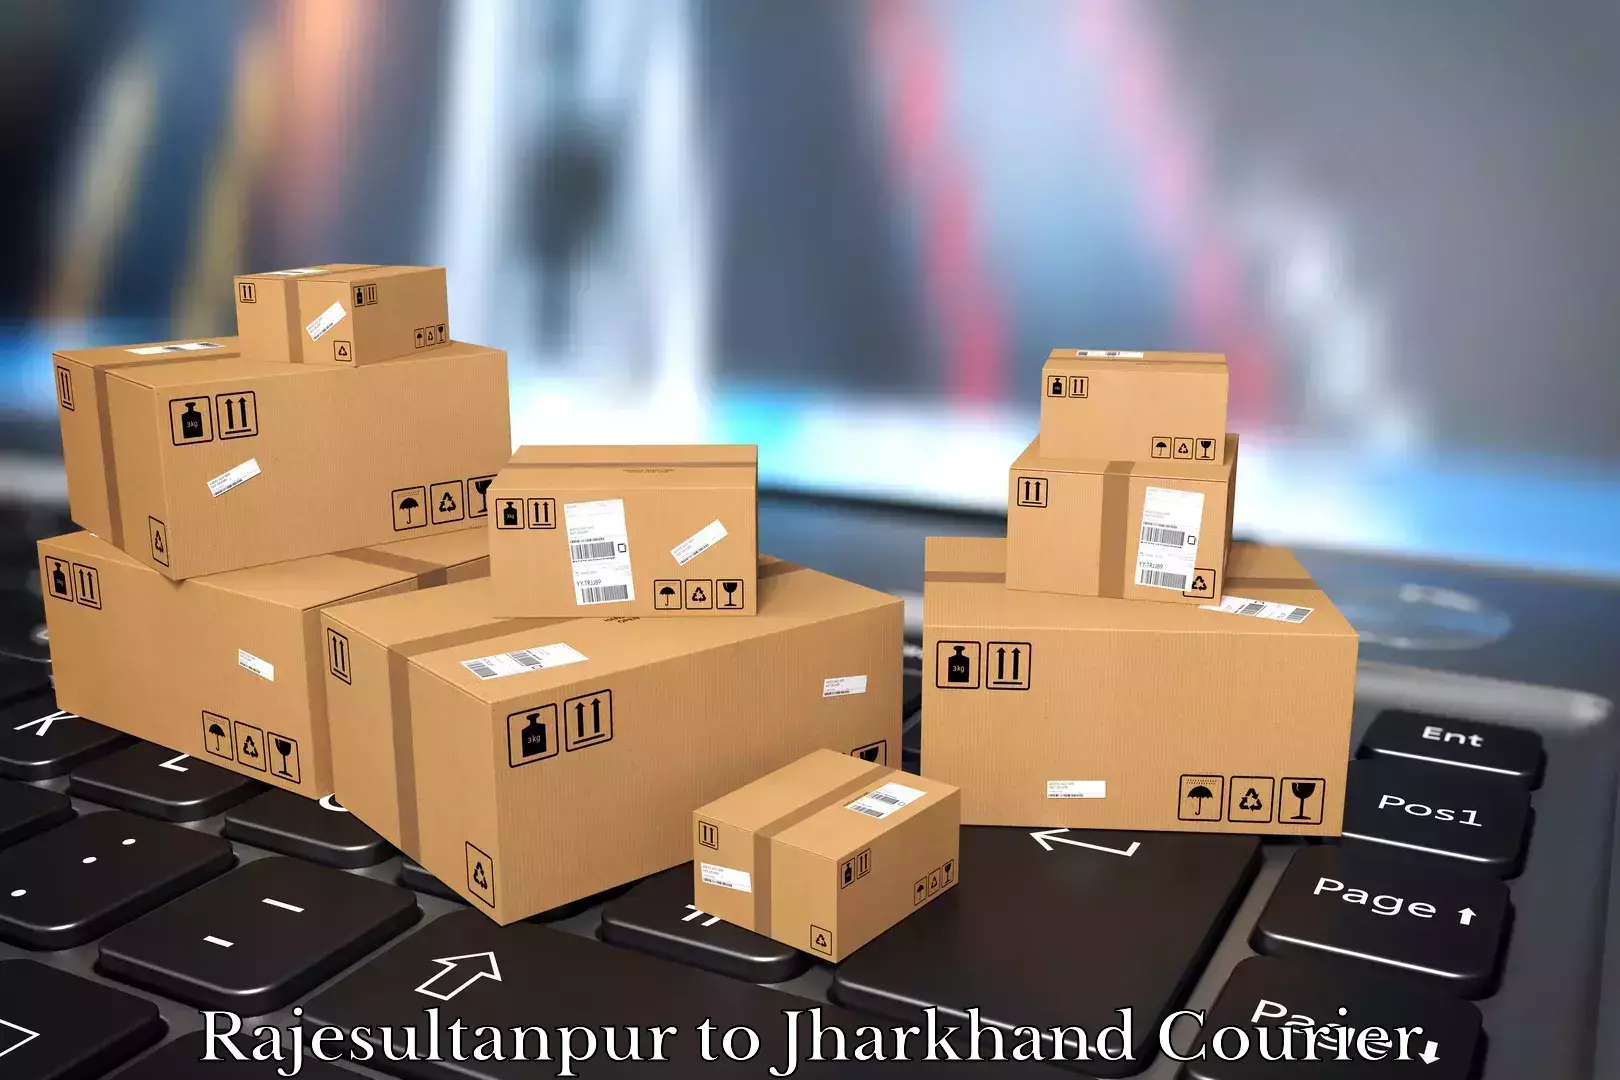 Furniture delivery service Rajesultanpur to Dhanbad